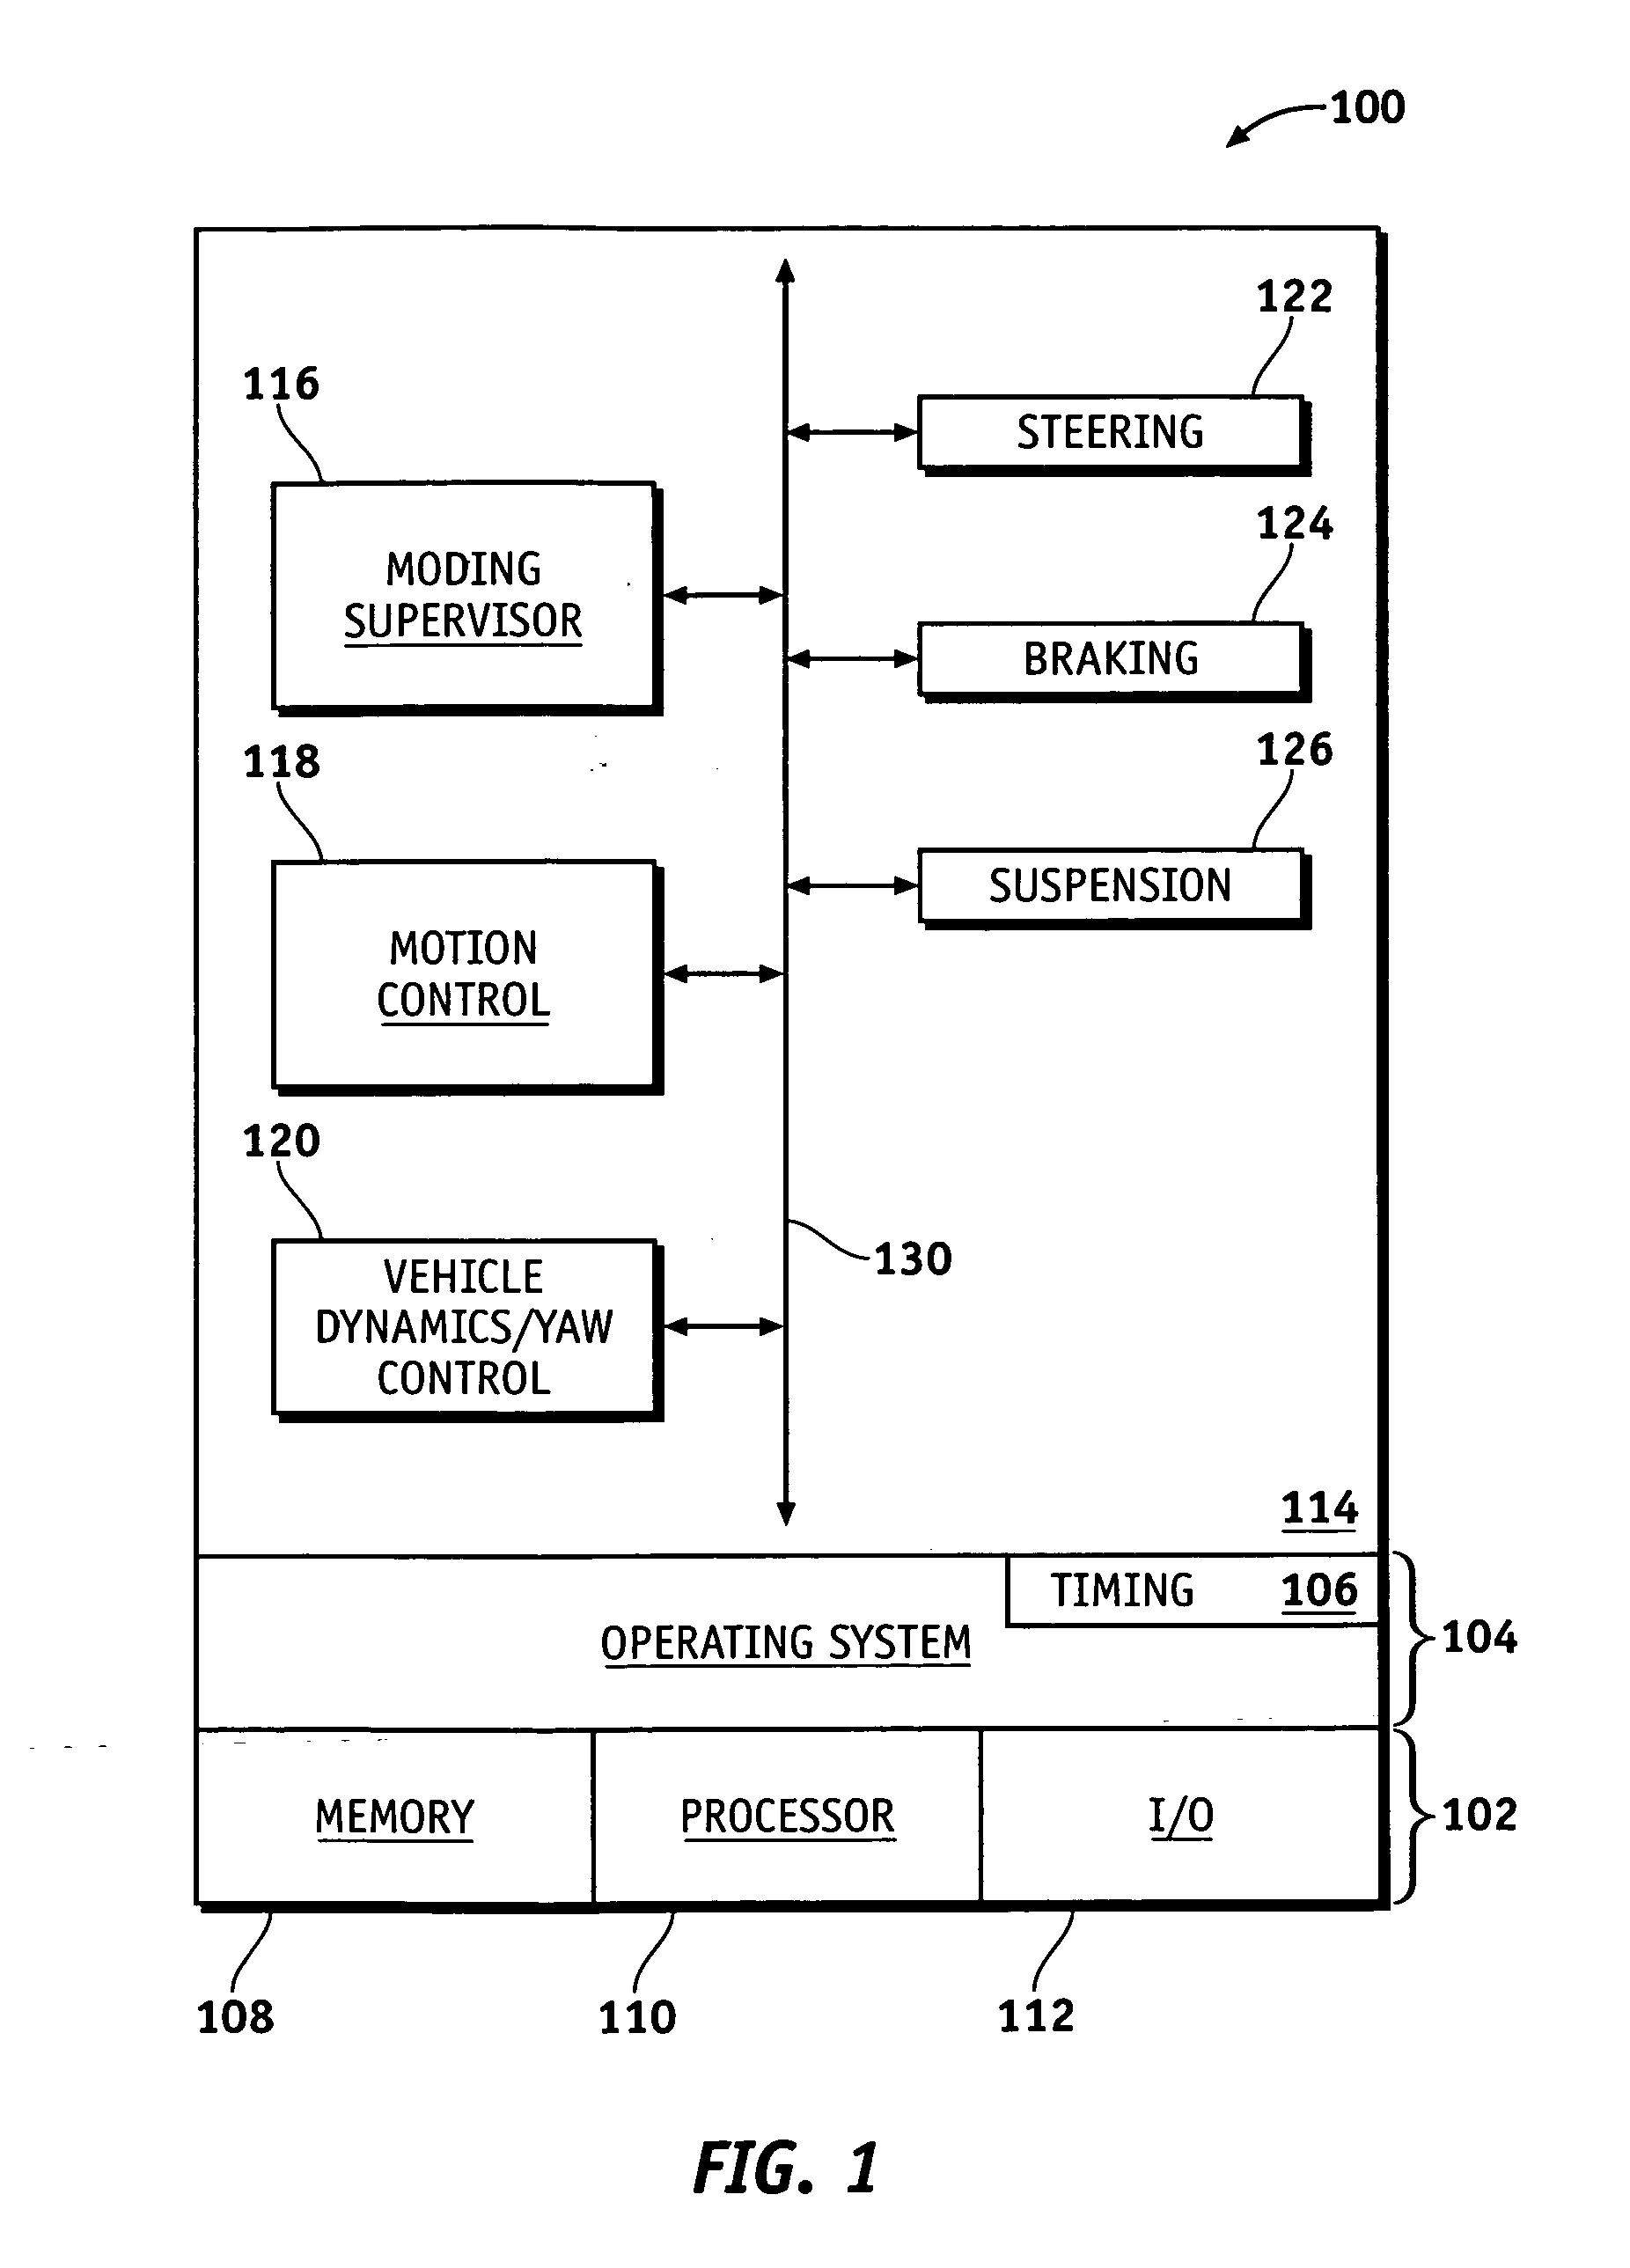 Method and system for performing function-specific memory checks within a vehicle-based control system